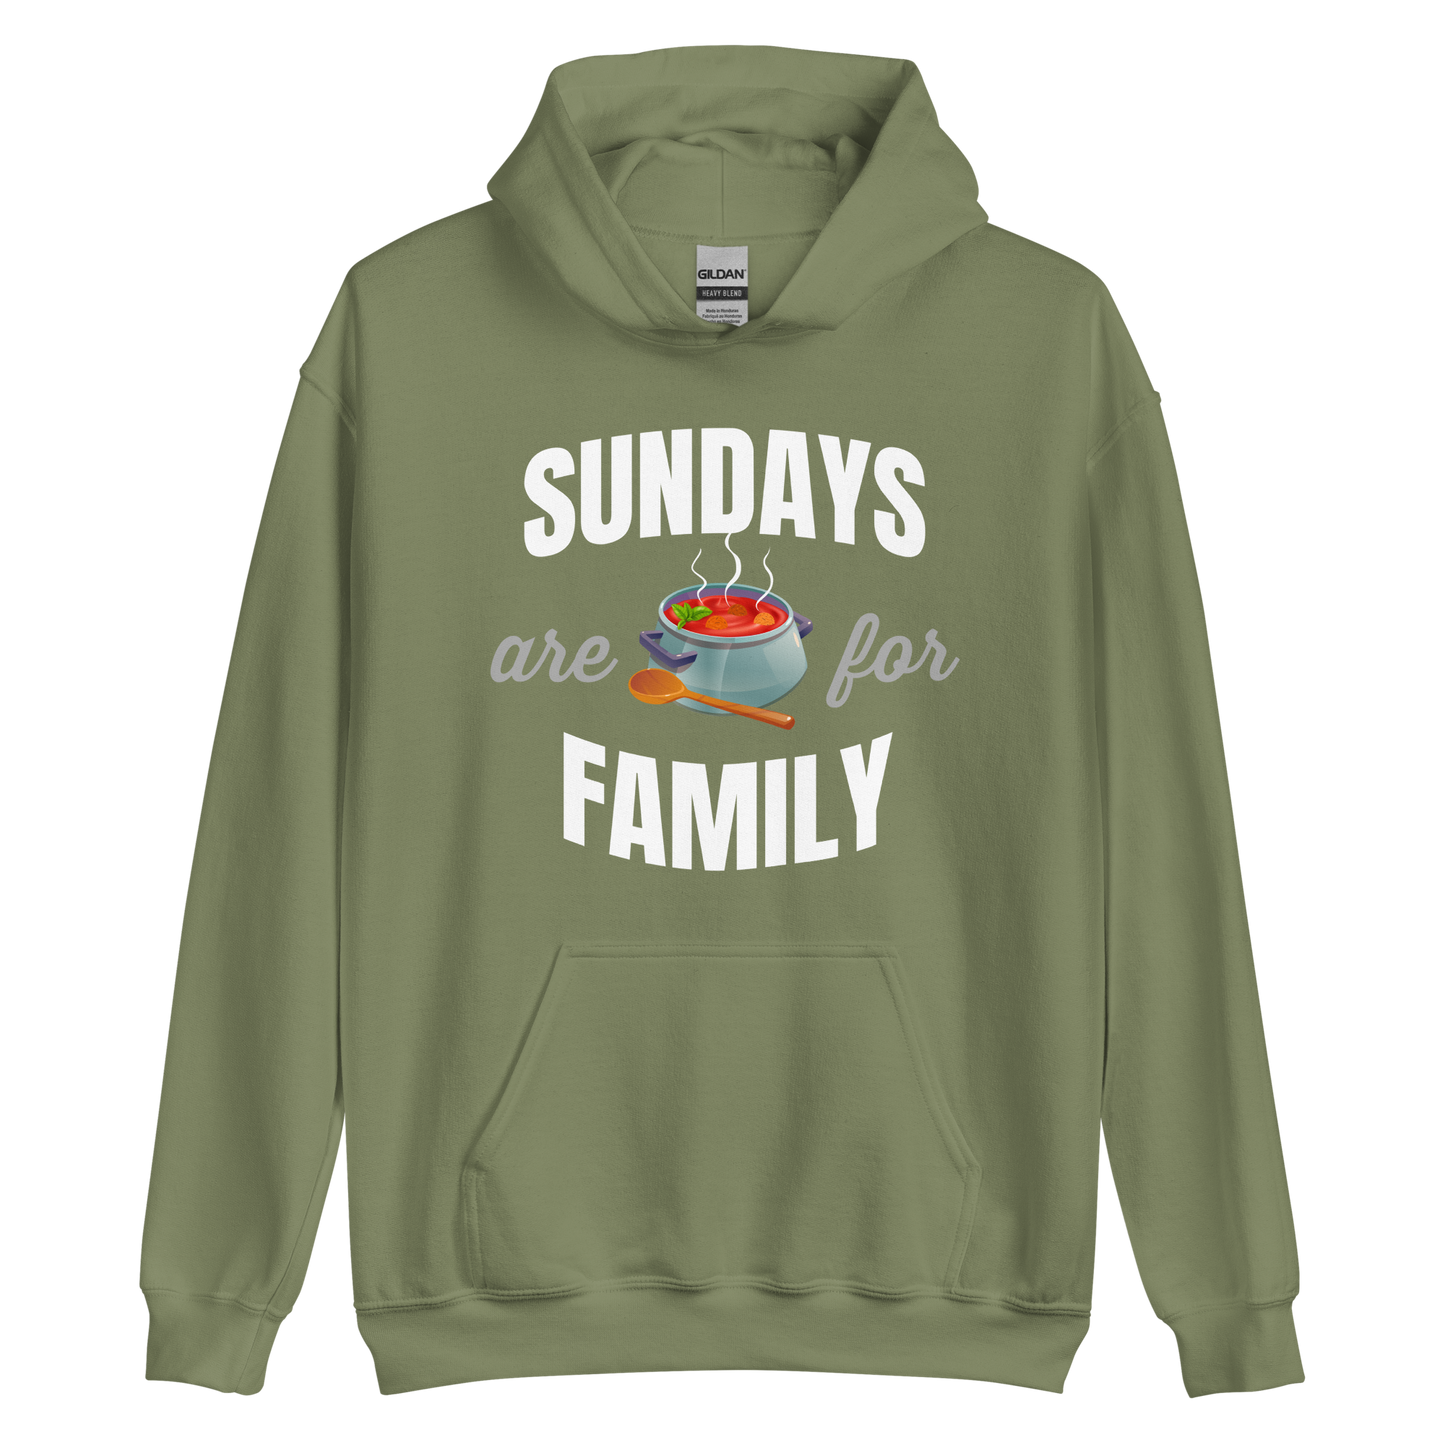 Sundays are for Family Italian Sauce Hoodie: Embrace Tradition and Togetherness- Vintage Hoodie for Italians